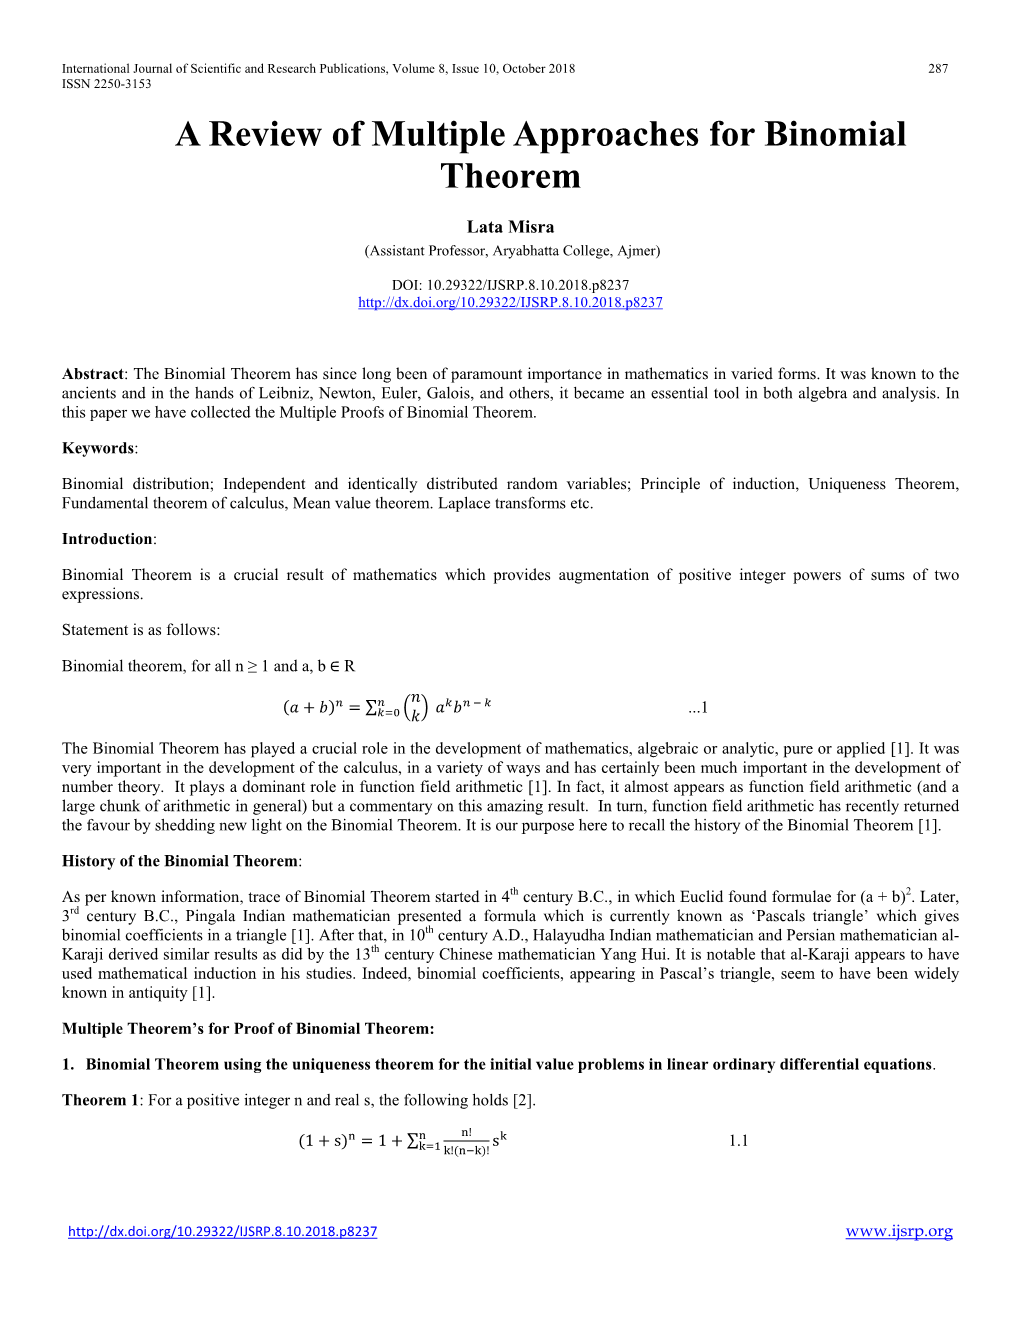 A Review of Multiple Approaches for Binomial Theorem